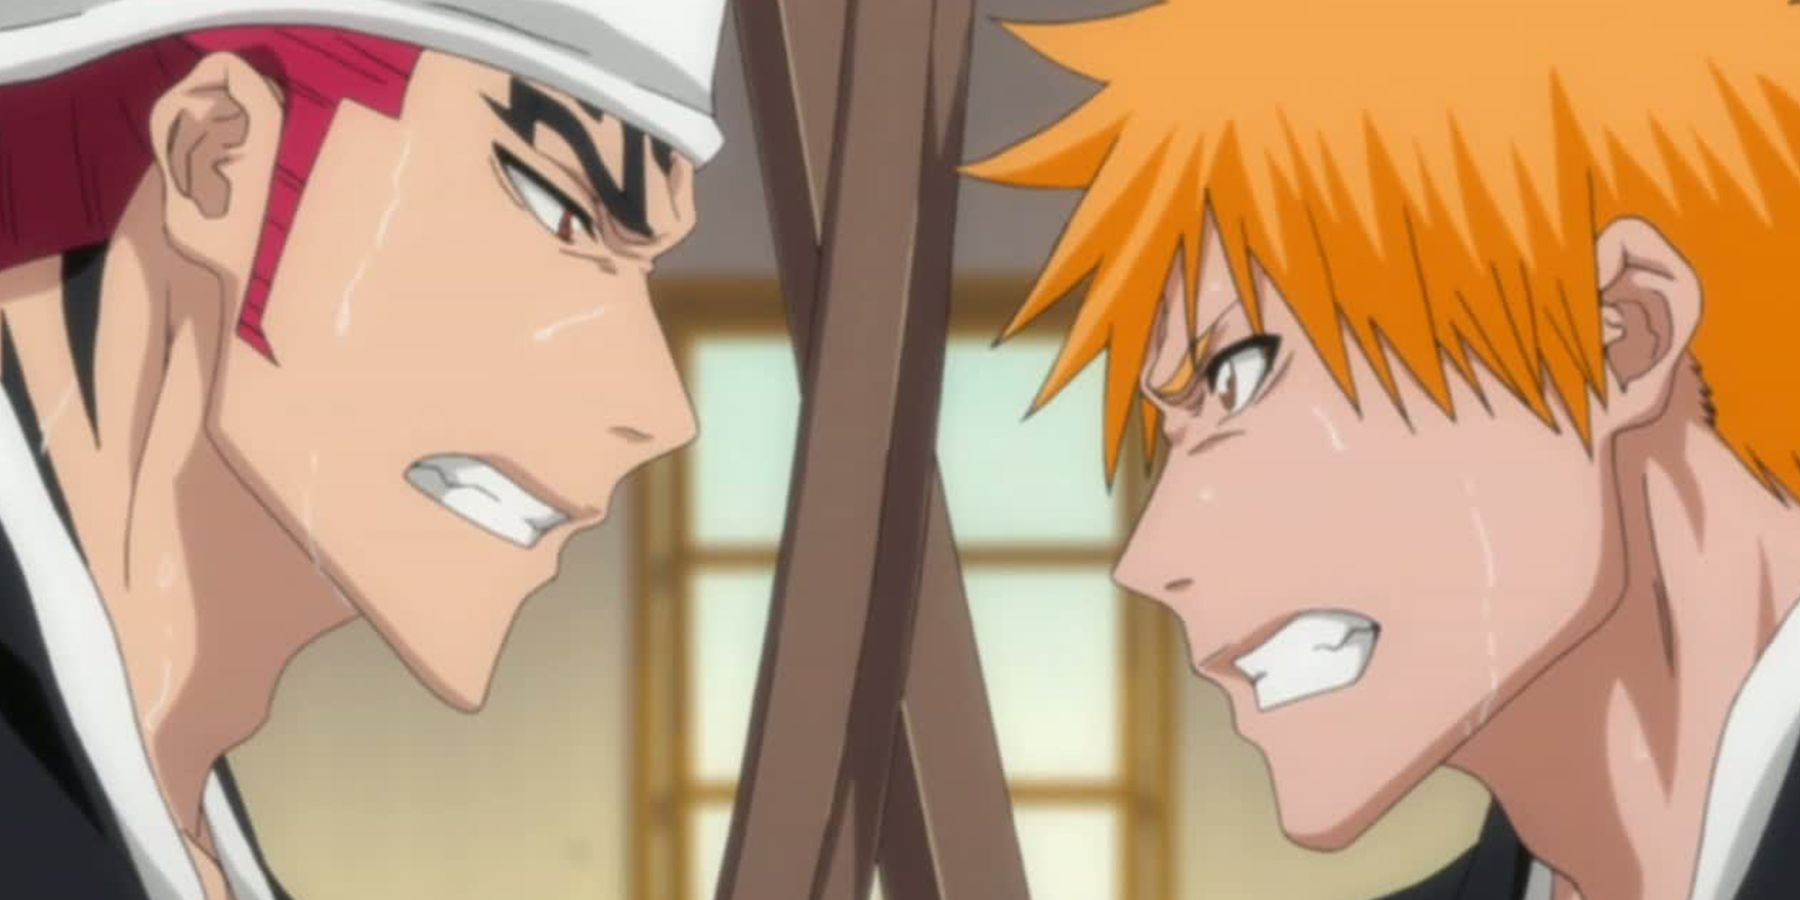 Renji Ibarra (Left) and Ichigo Kurosaki (Right), two rival Soul Reapers, training during in Bleach's Soul Society